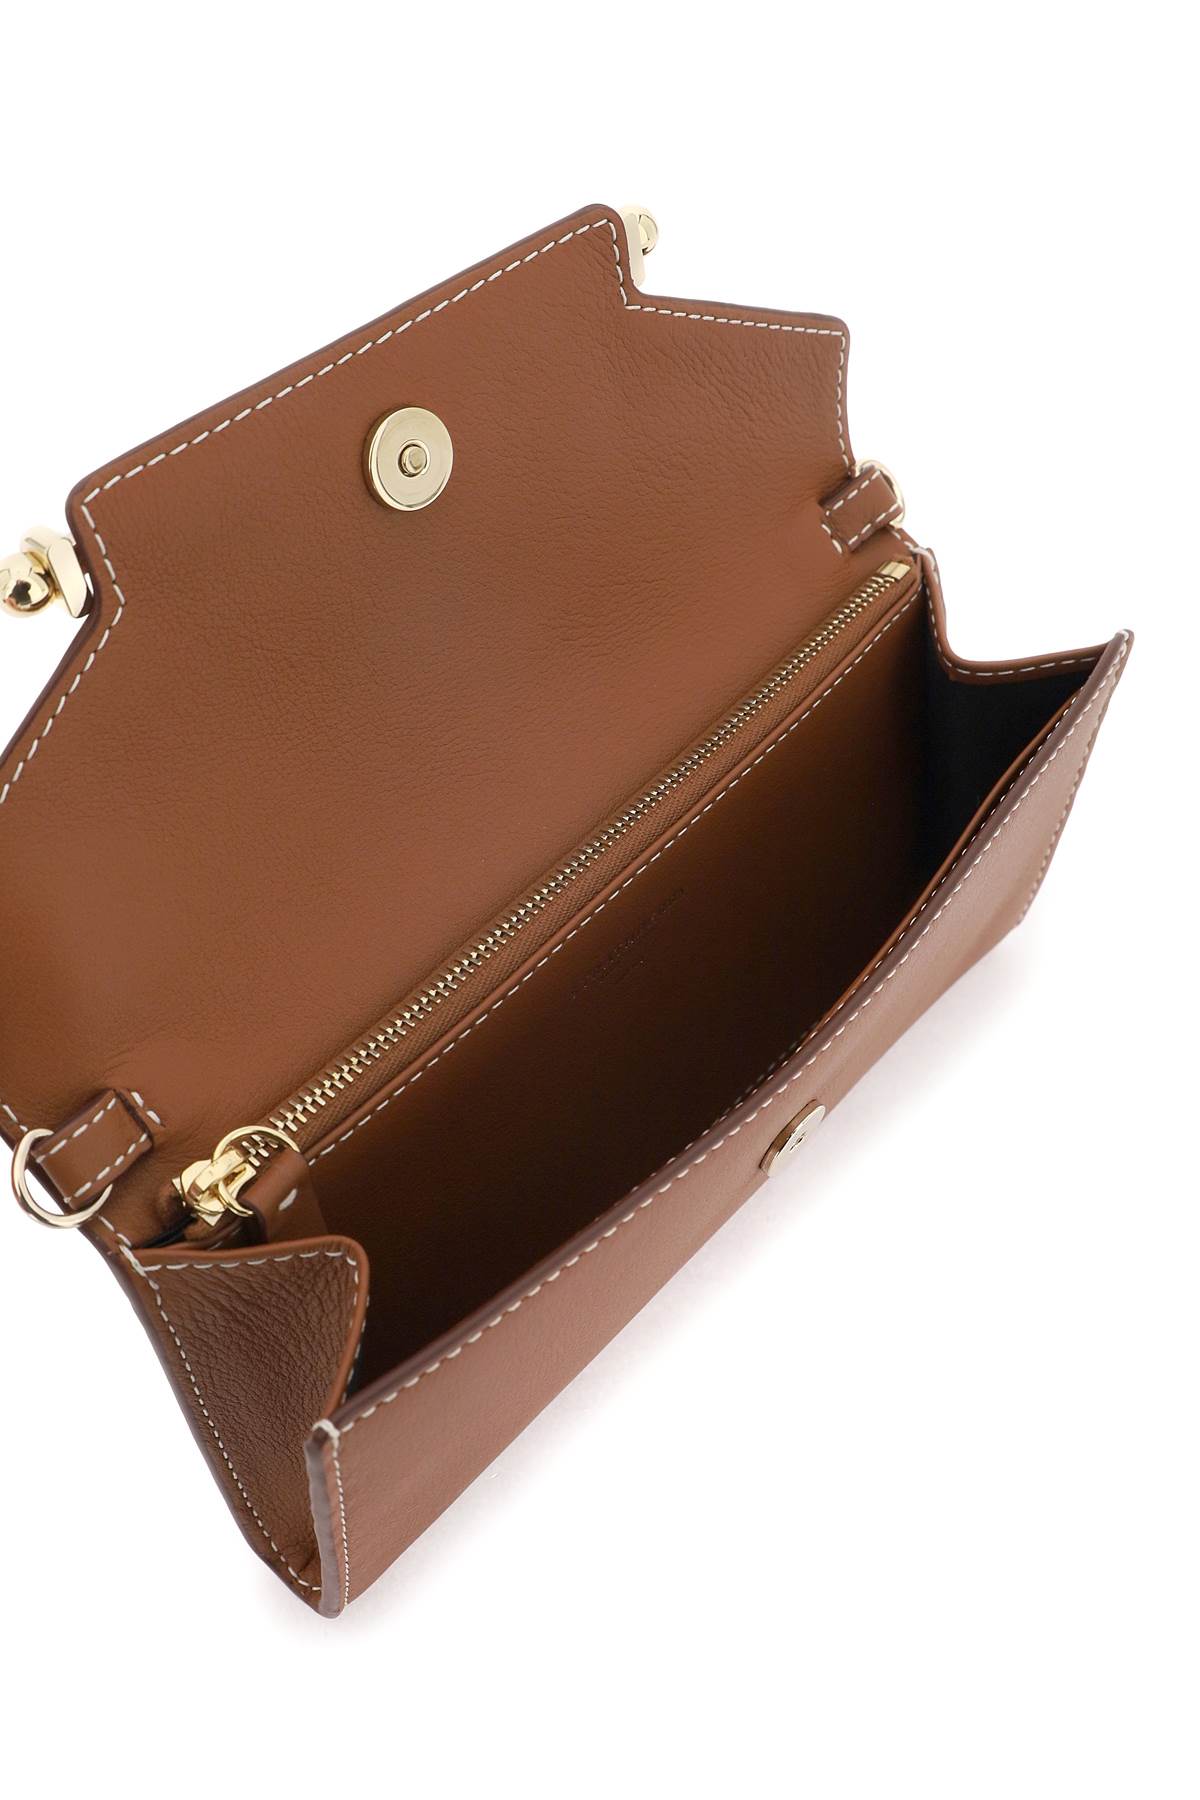 Shop Strathberry Multress Mini Bag In Brown